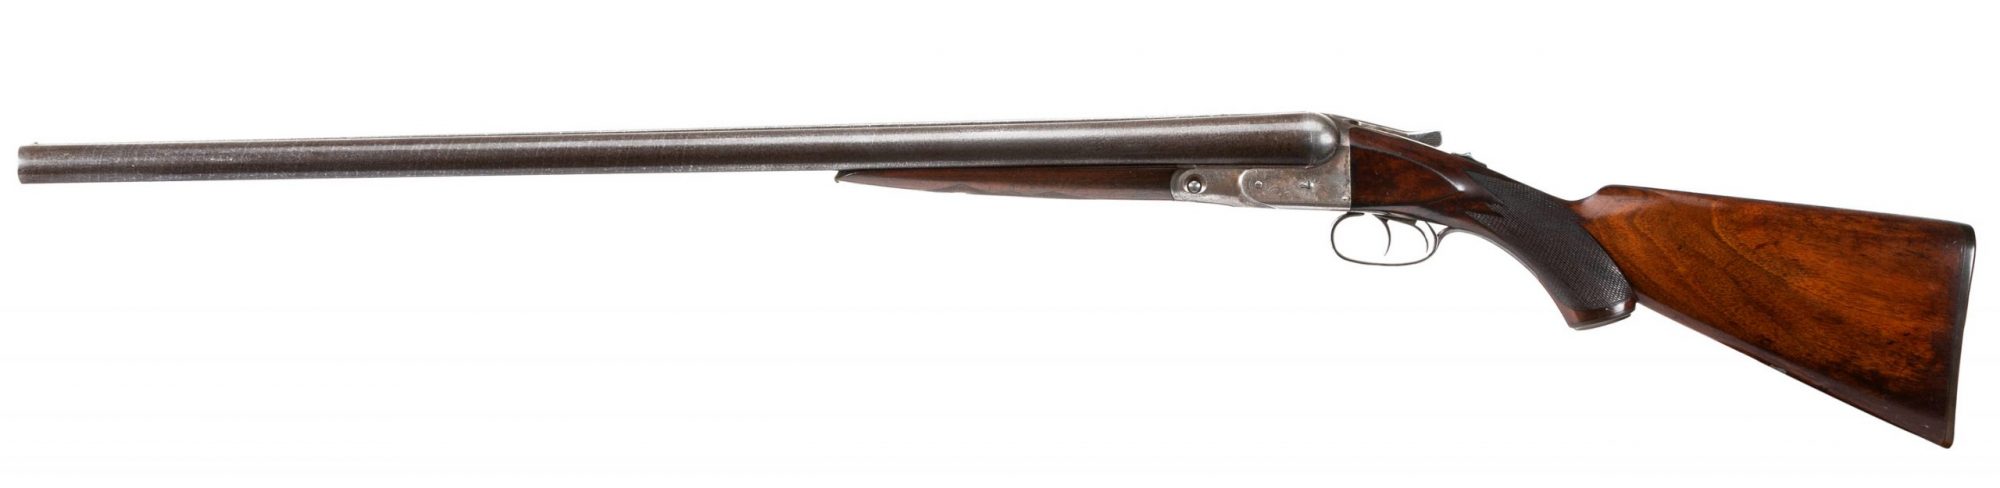 Photo of an antique Parker PH 10 gauge side-by-side shotgun from 1890. For sale as-is by Turnbull Restoration of Bloomfield, NY